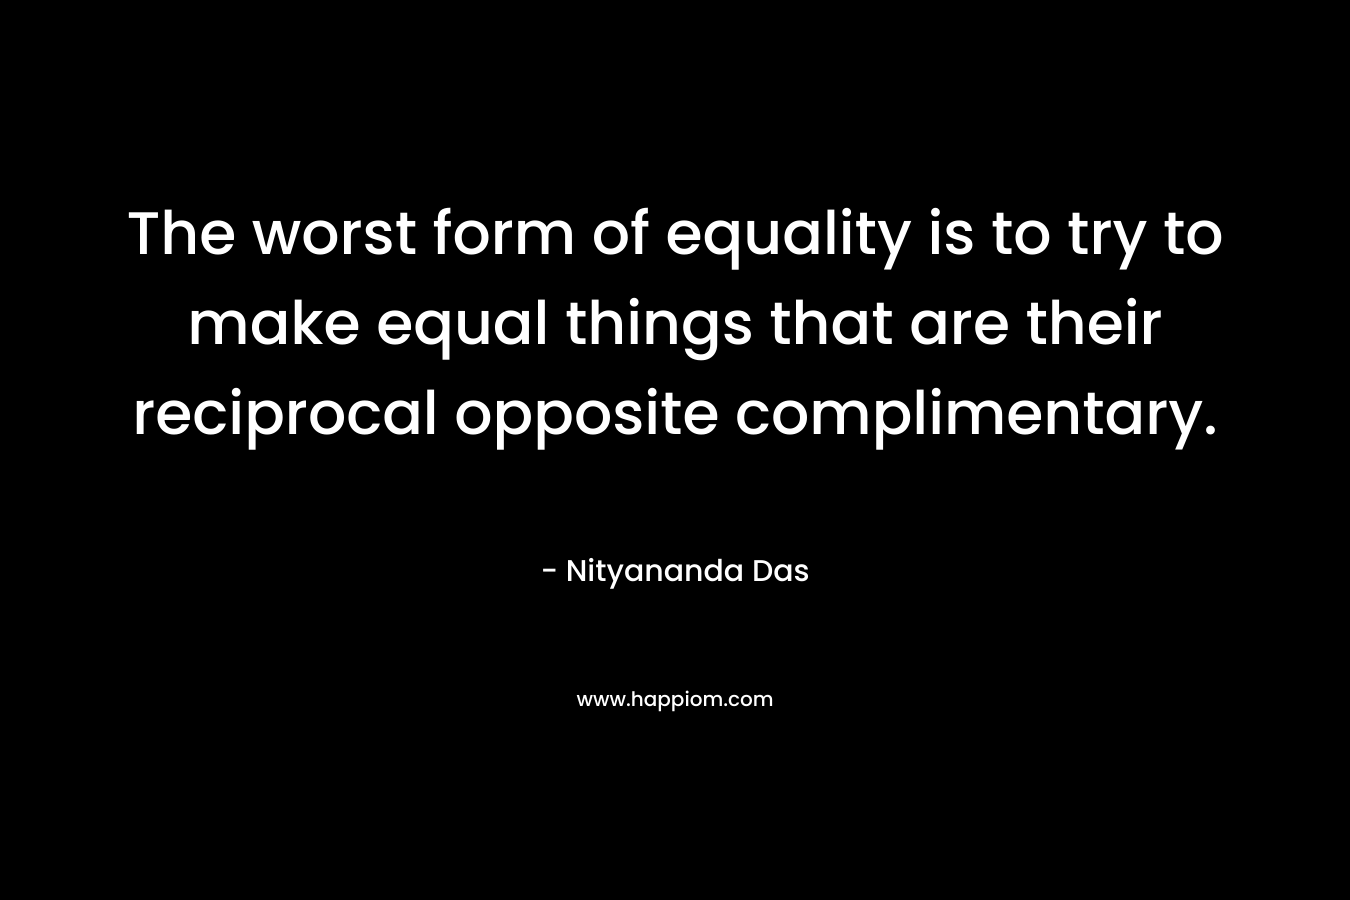 The worst form of equality is to try to make equal things that are their reciprocal opposite complimentary. – Nityananda Das